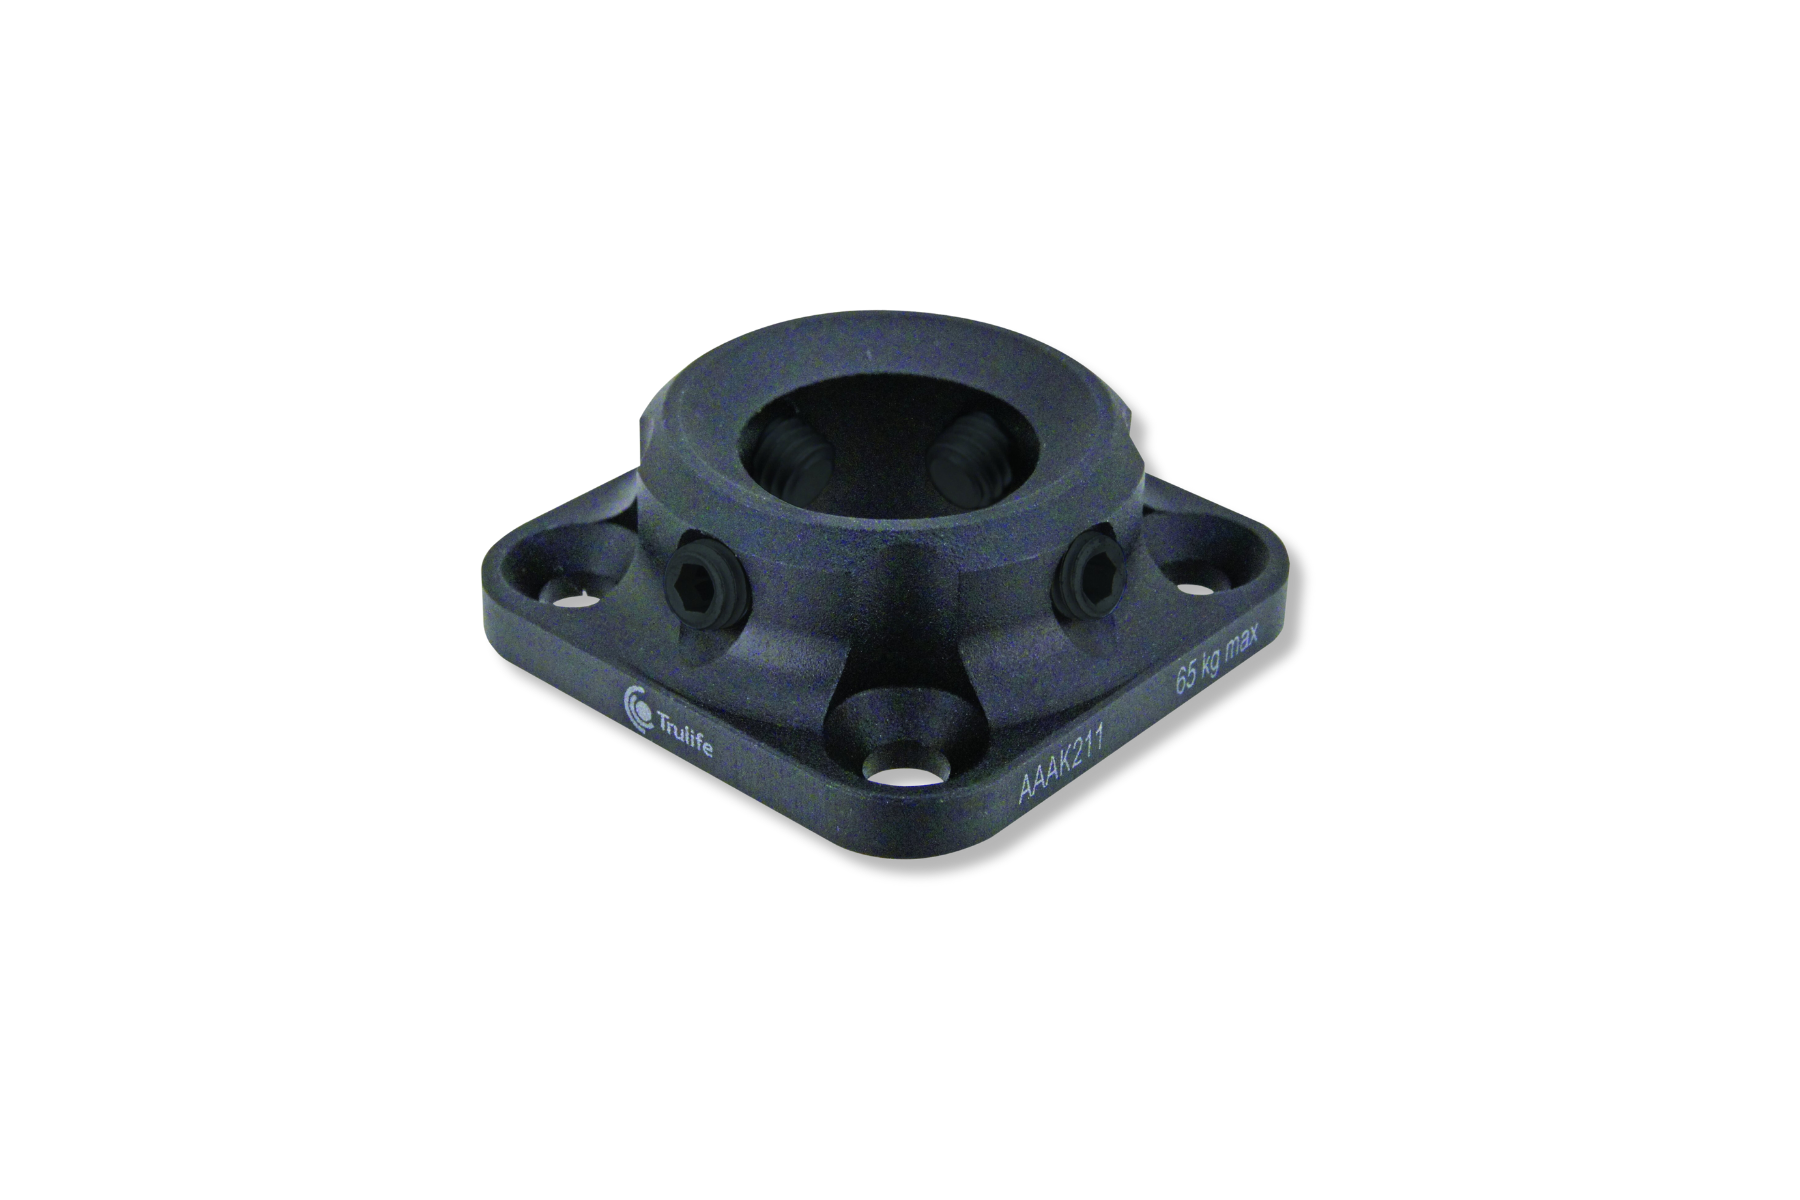 AAAK211 Child’s Play 4-Hole Female Adapter